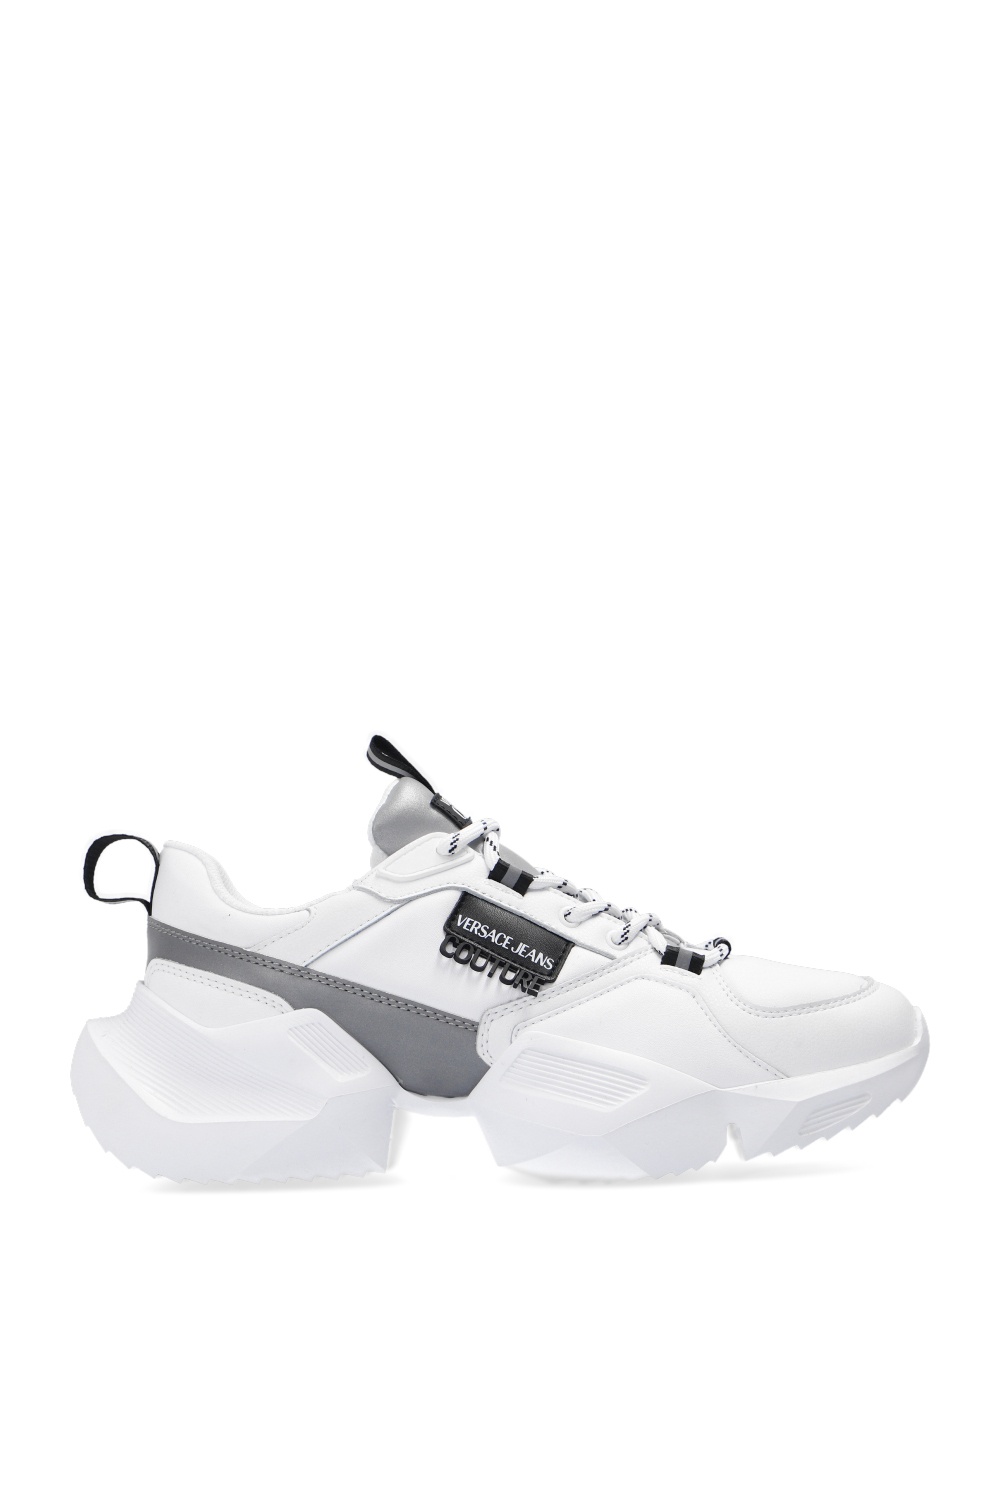 versace jeans shoes white